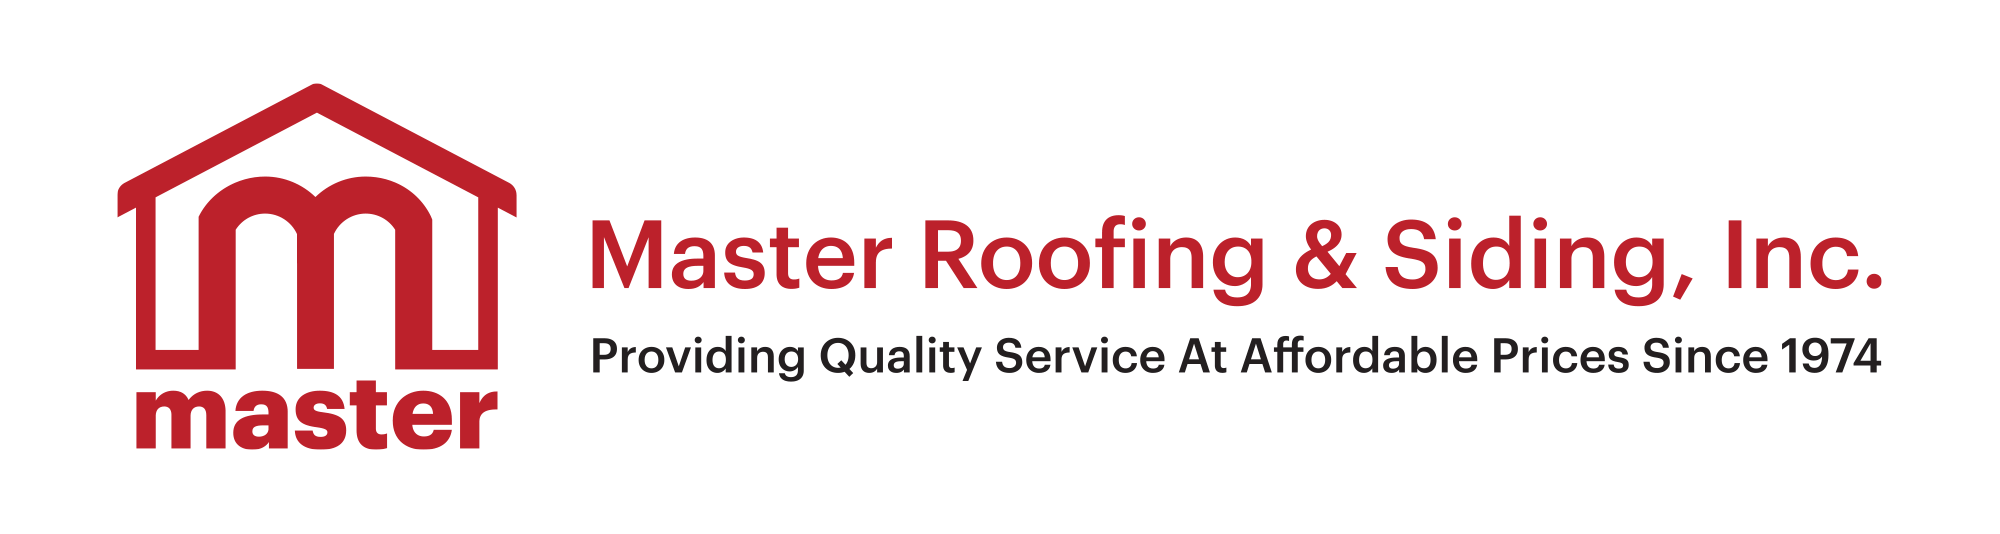 Master Roofing & Siding - Alexandria trusted roofers